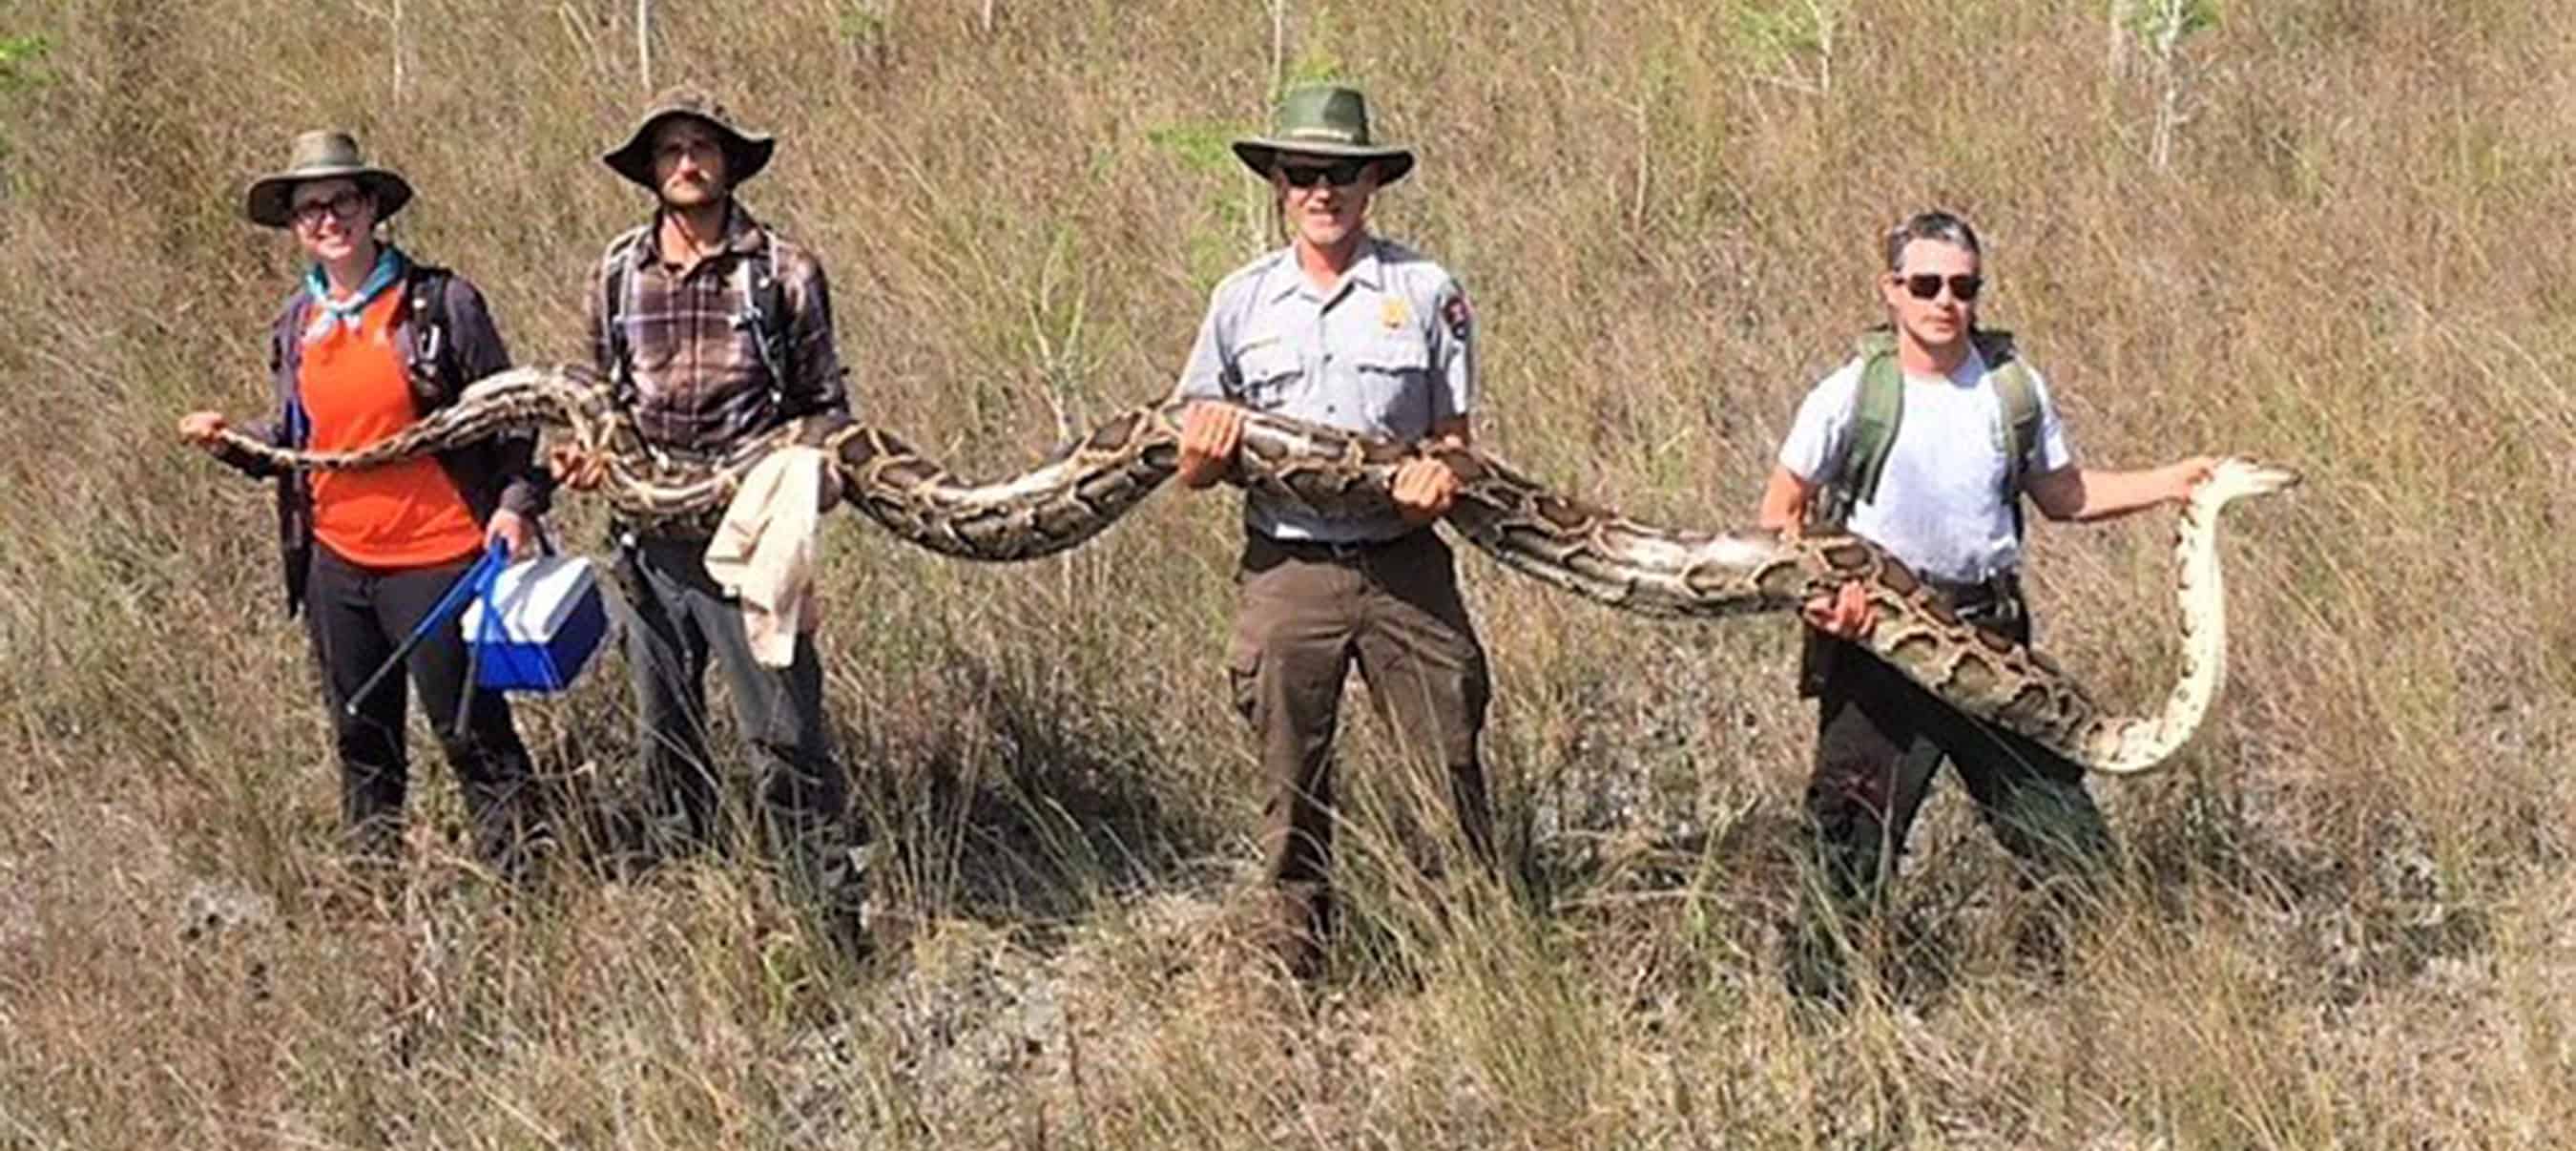 Recordsetting python discovered in Florida Everglades